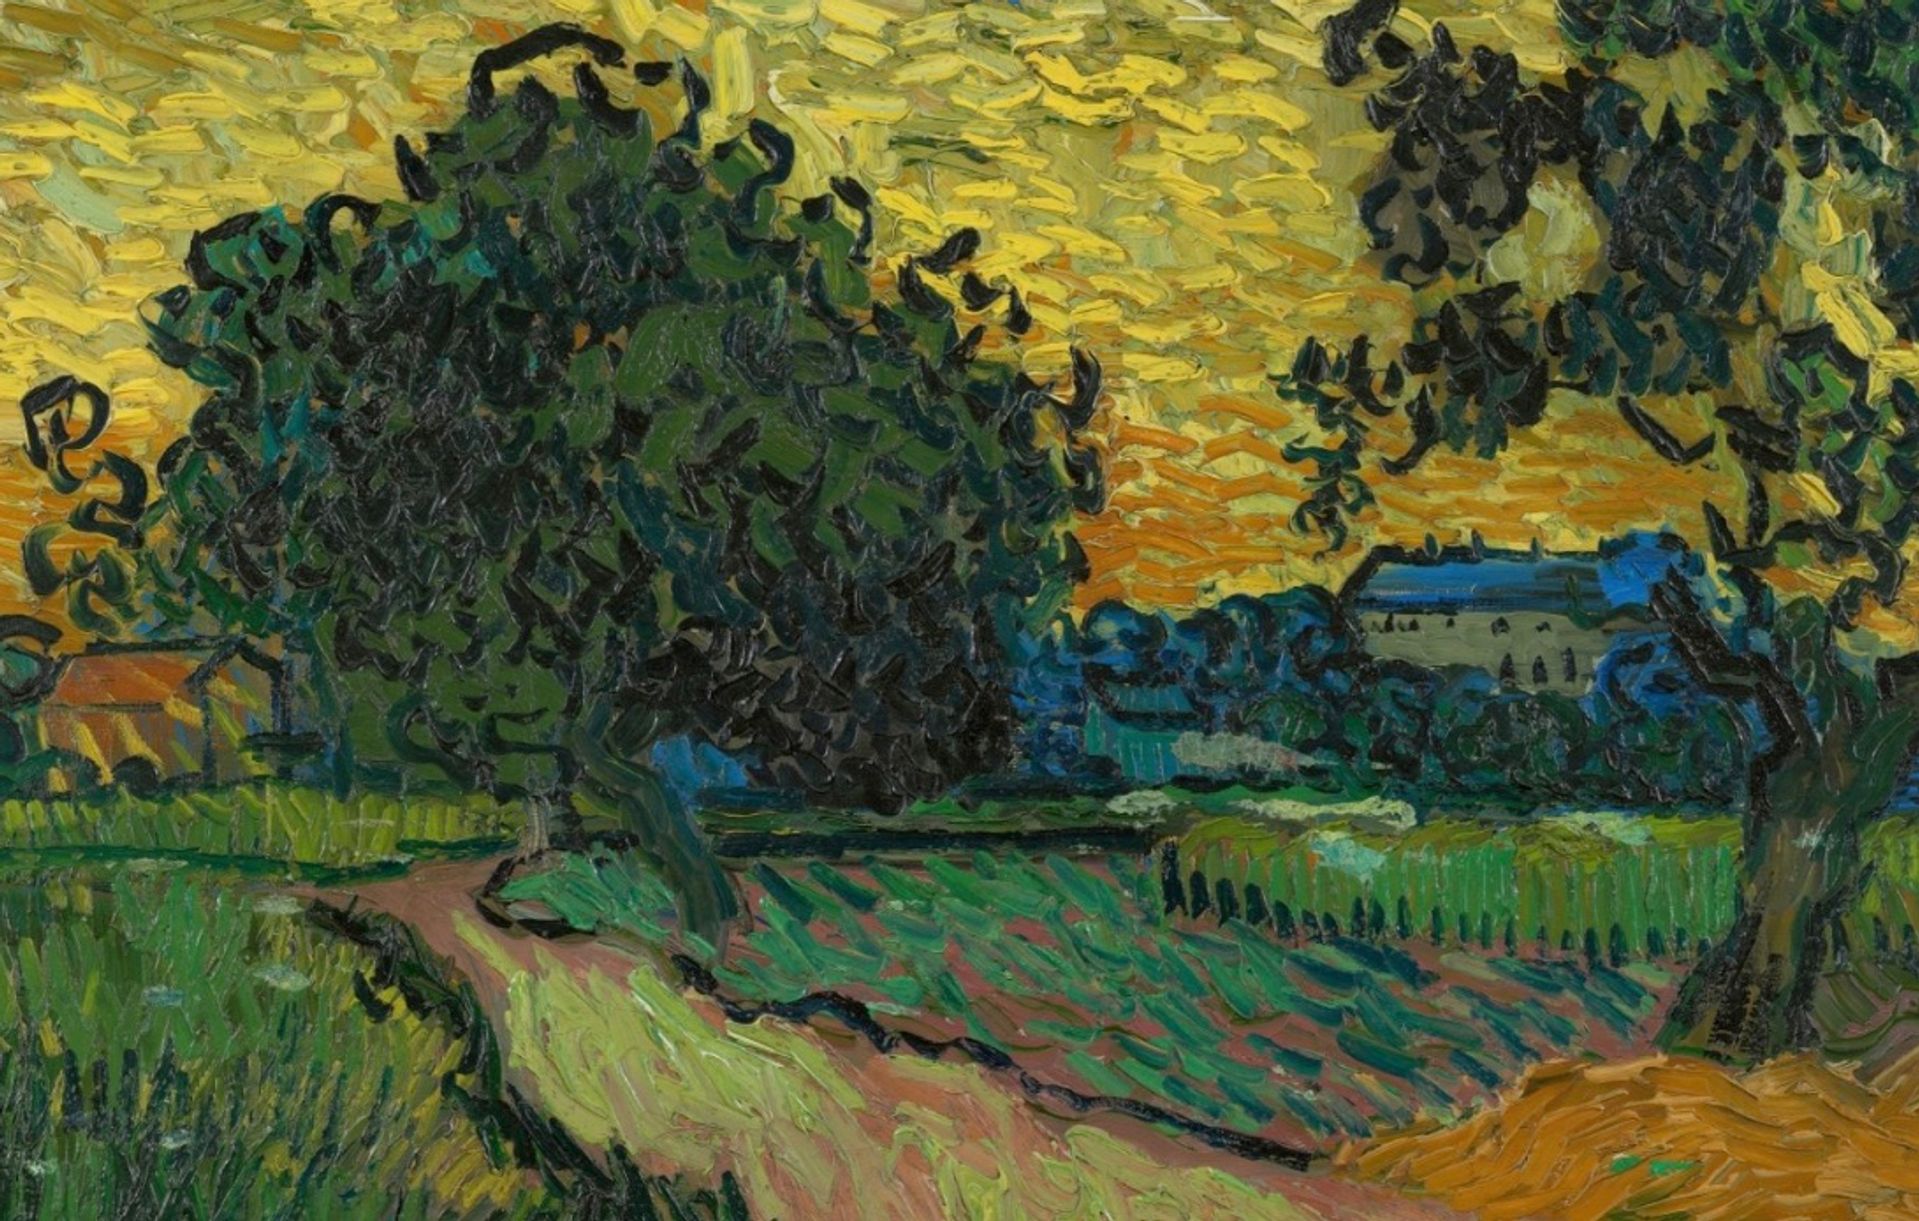 70 paintings in 70 days: Van Gogh's astonishing achievement at the